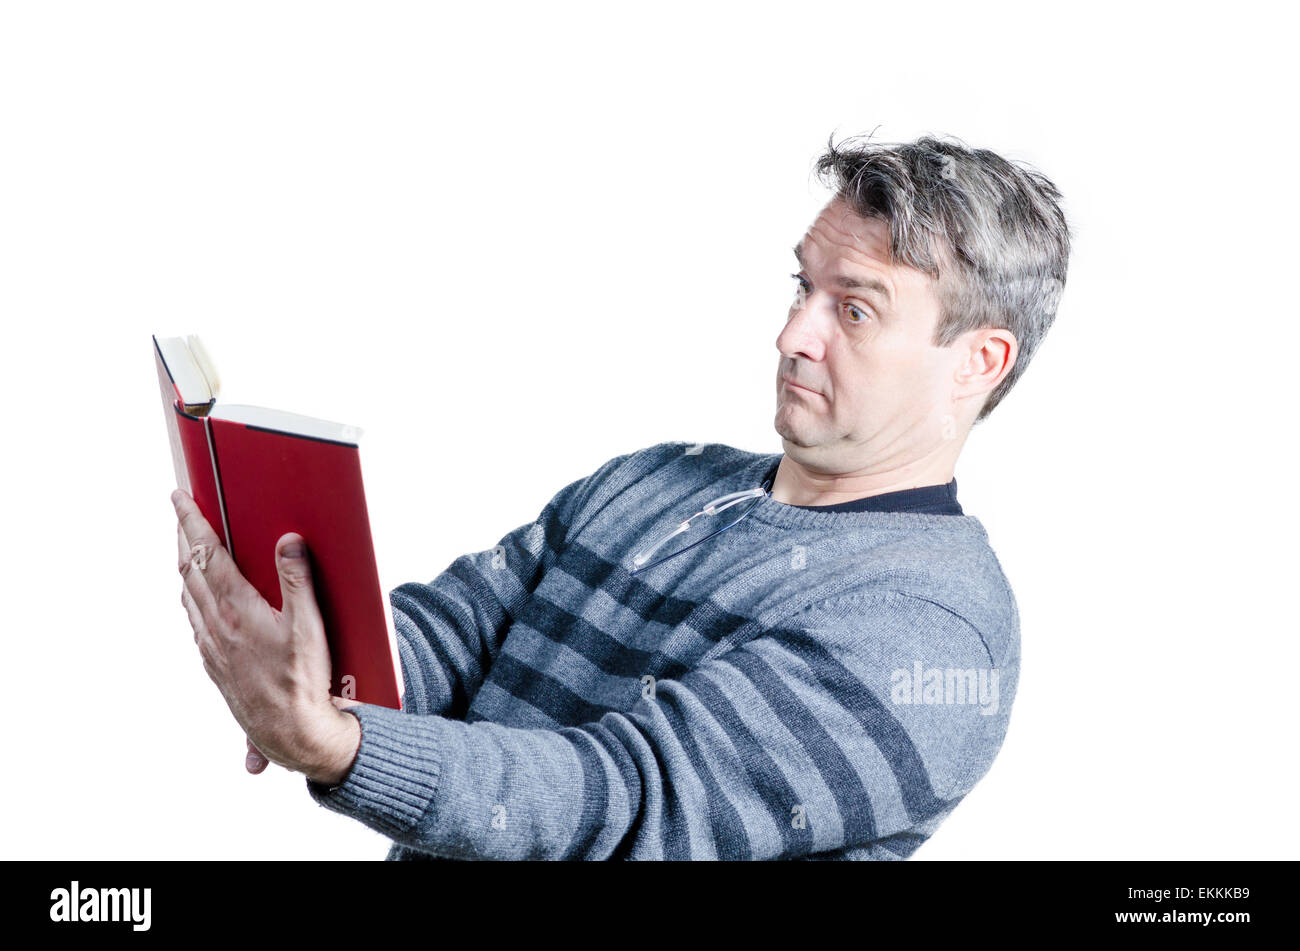 Guy finding holding a book at quite a distance to be able to read Stock Photo